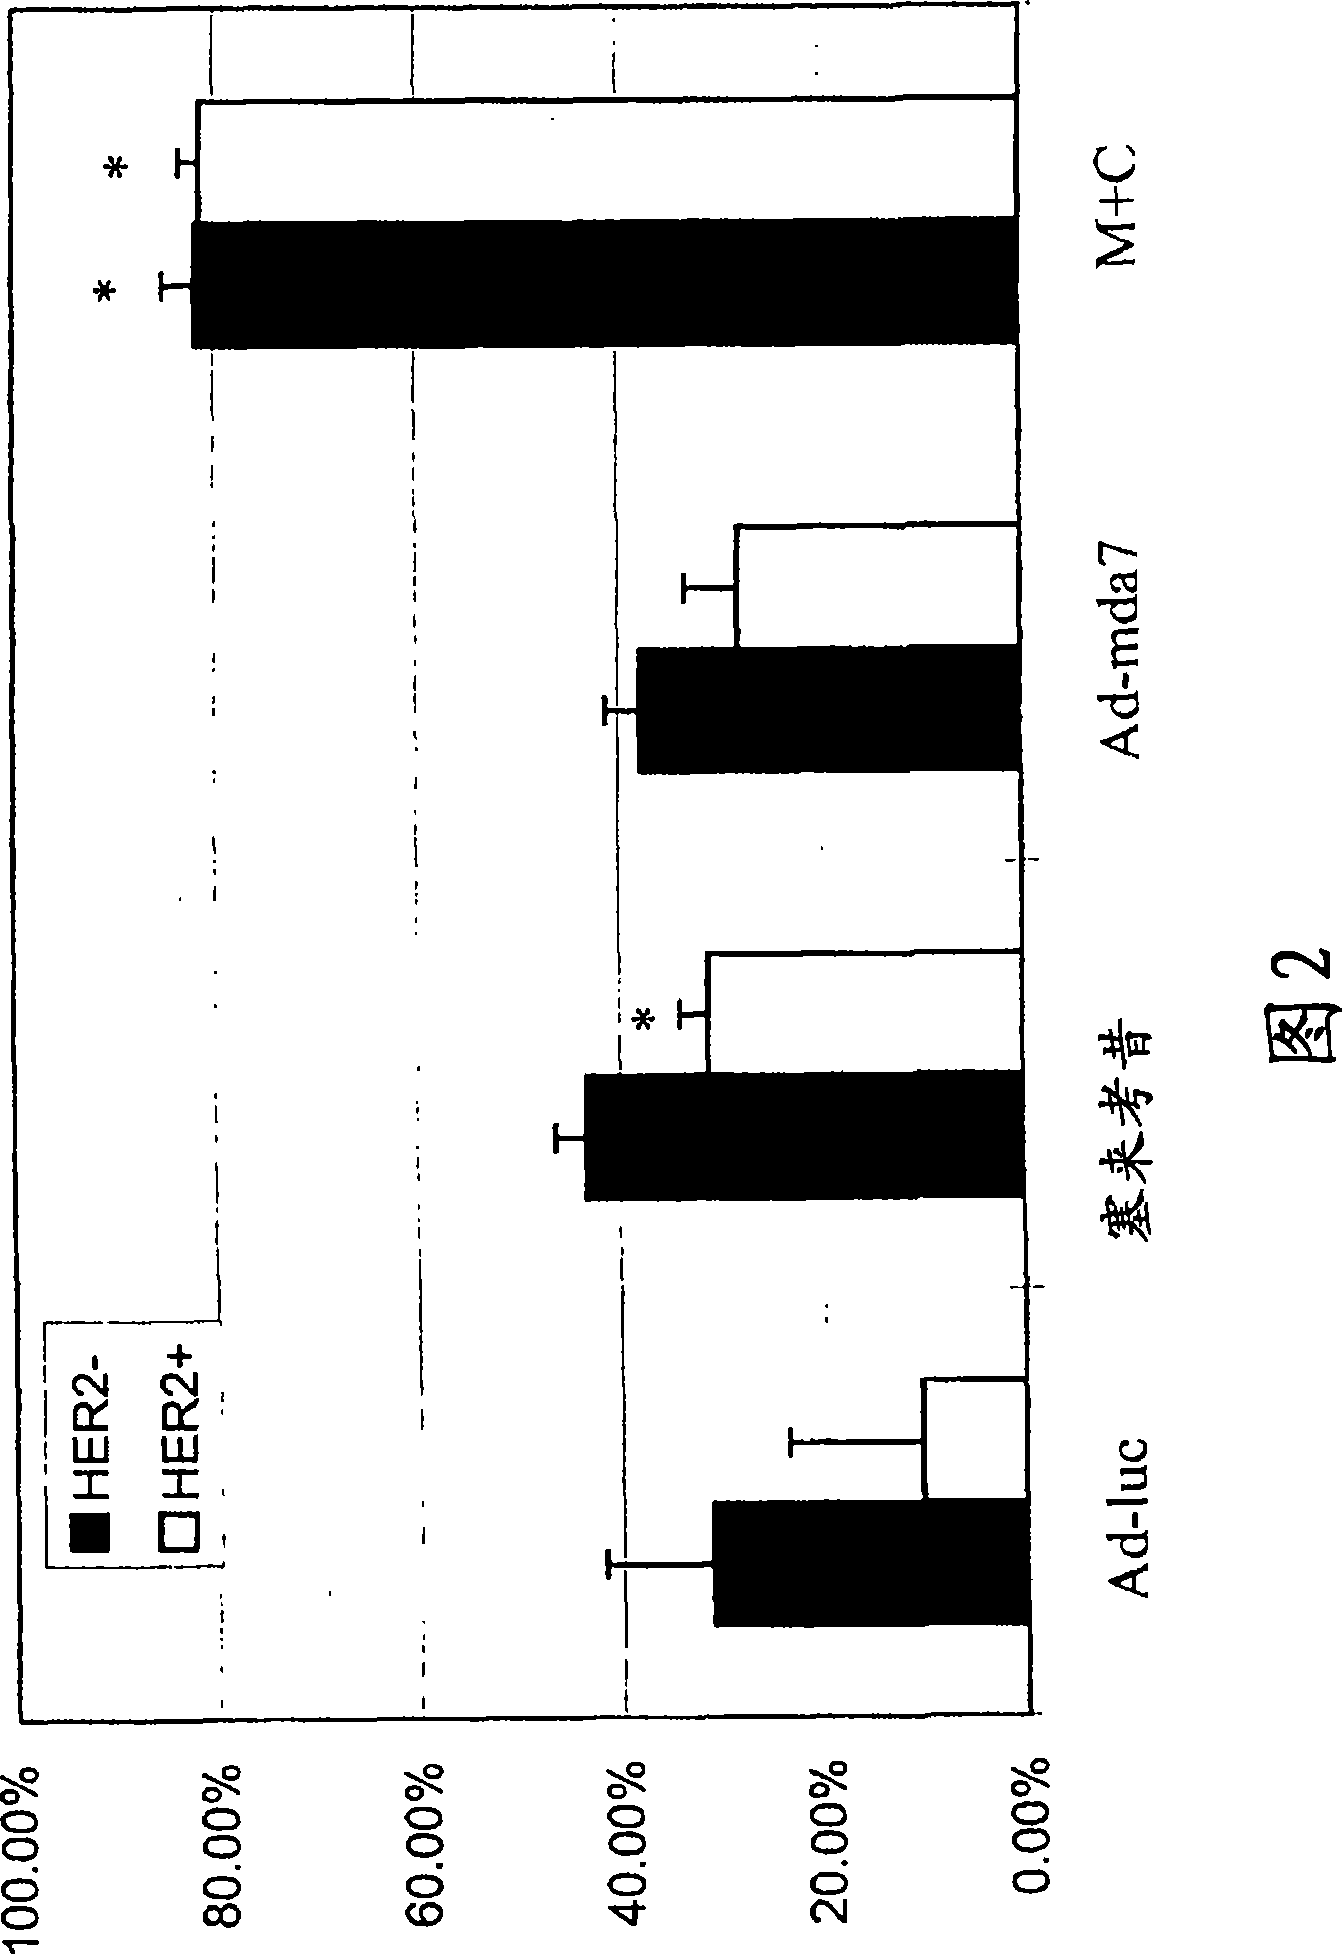 Compositions and methods involving MDA-7 for the treatment of cancer